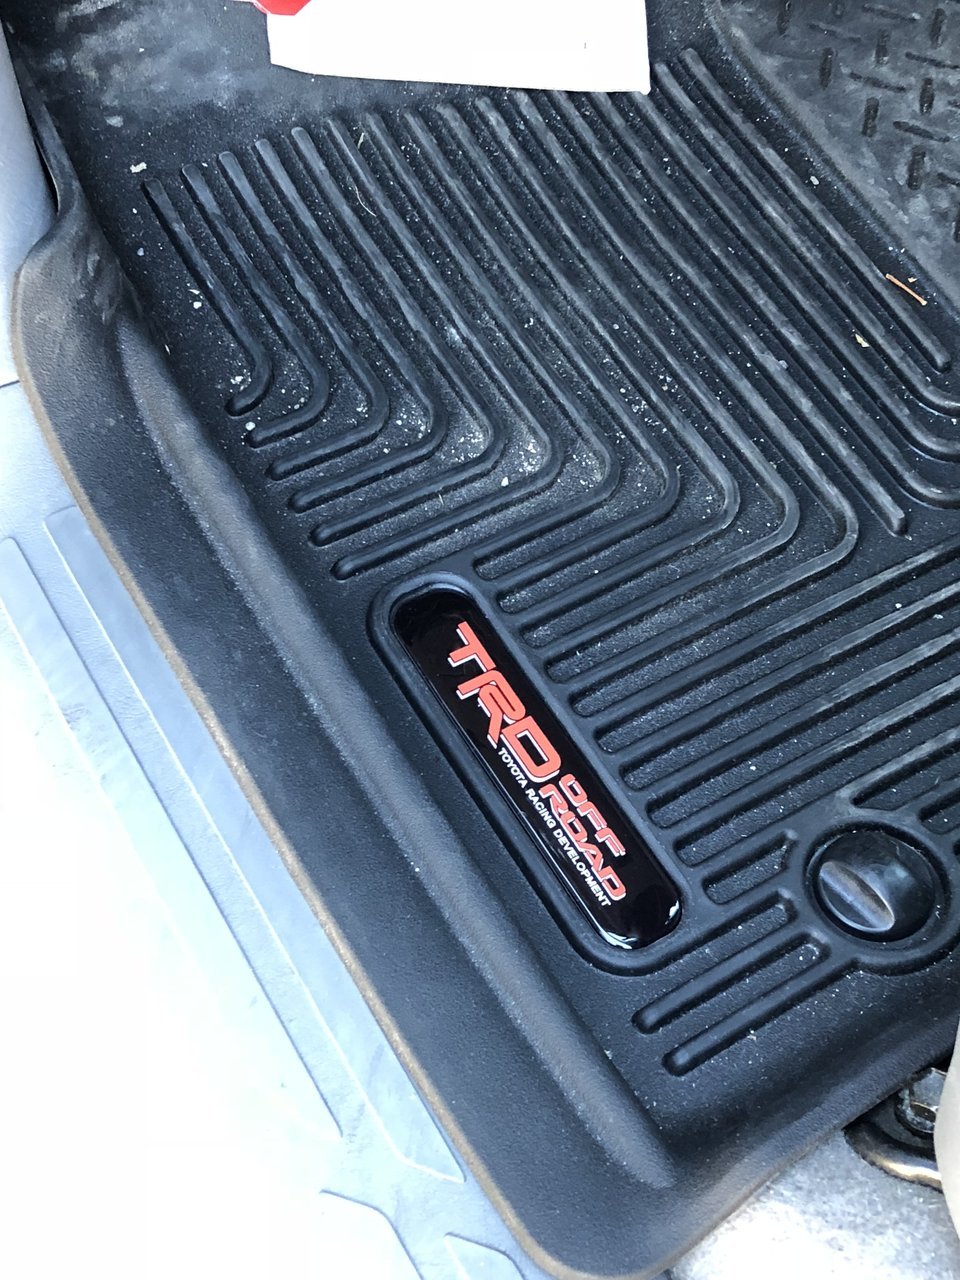 Do Trd Pro Branded All Weather Mats Exist Tacoma World